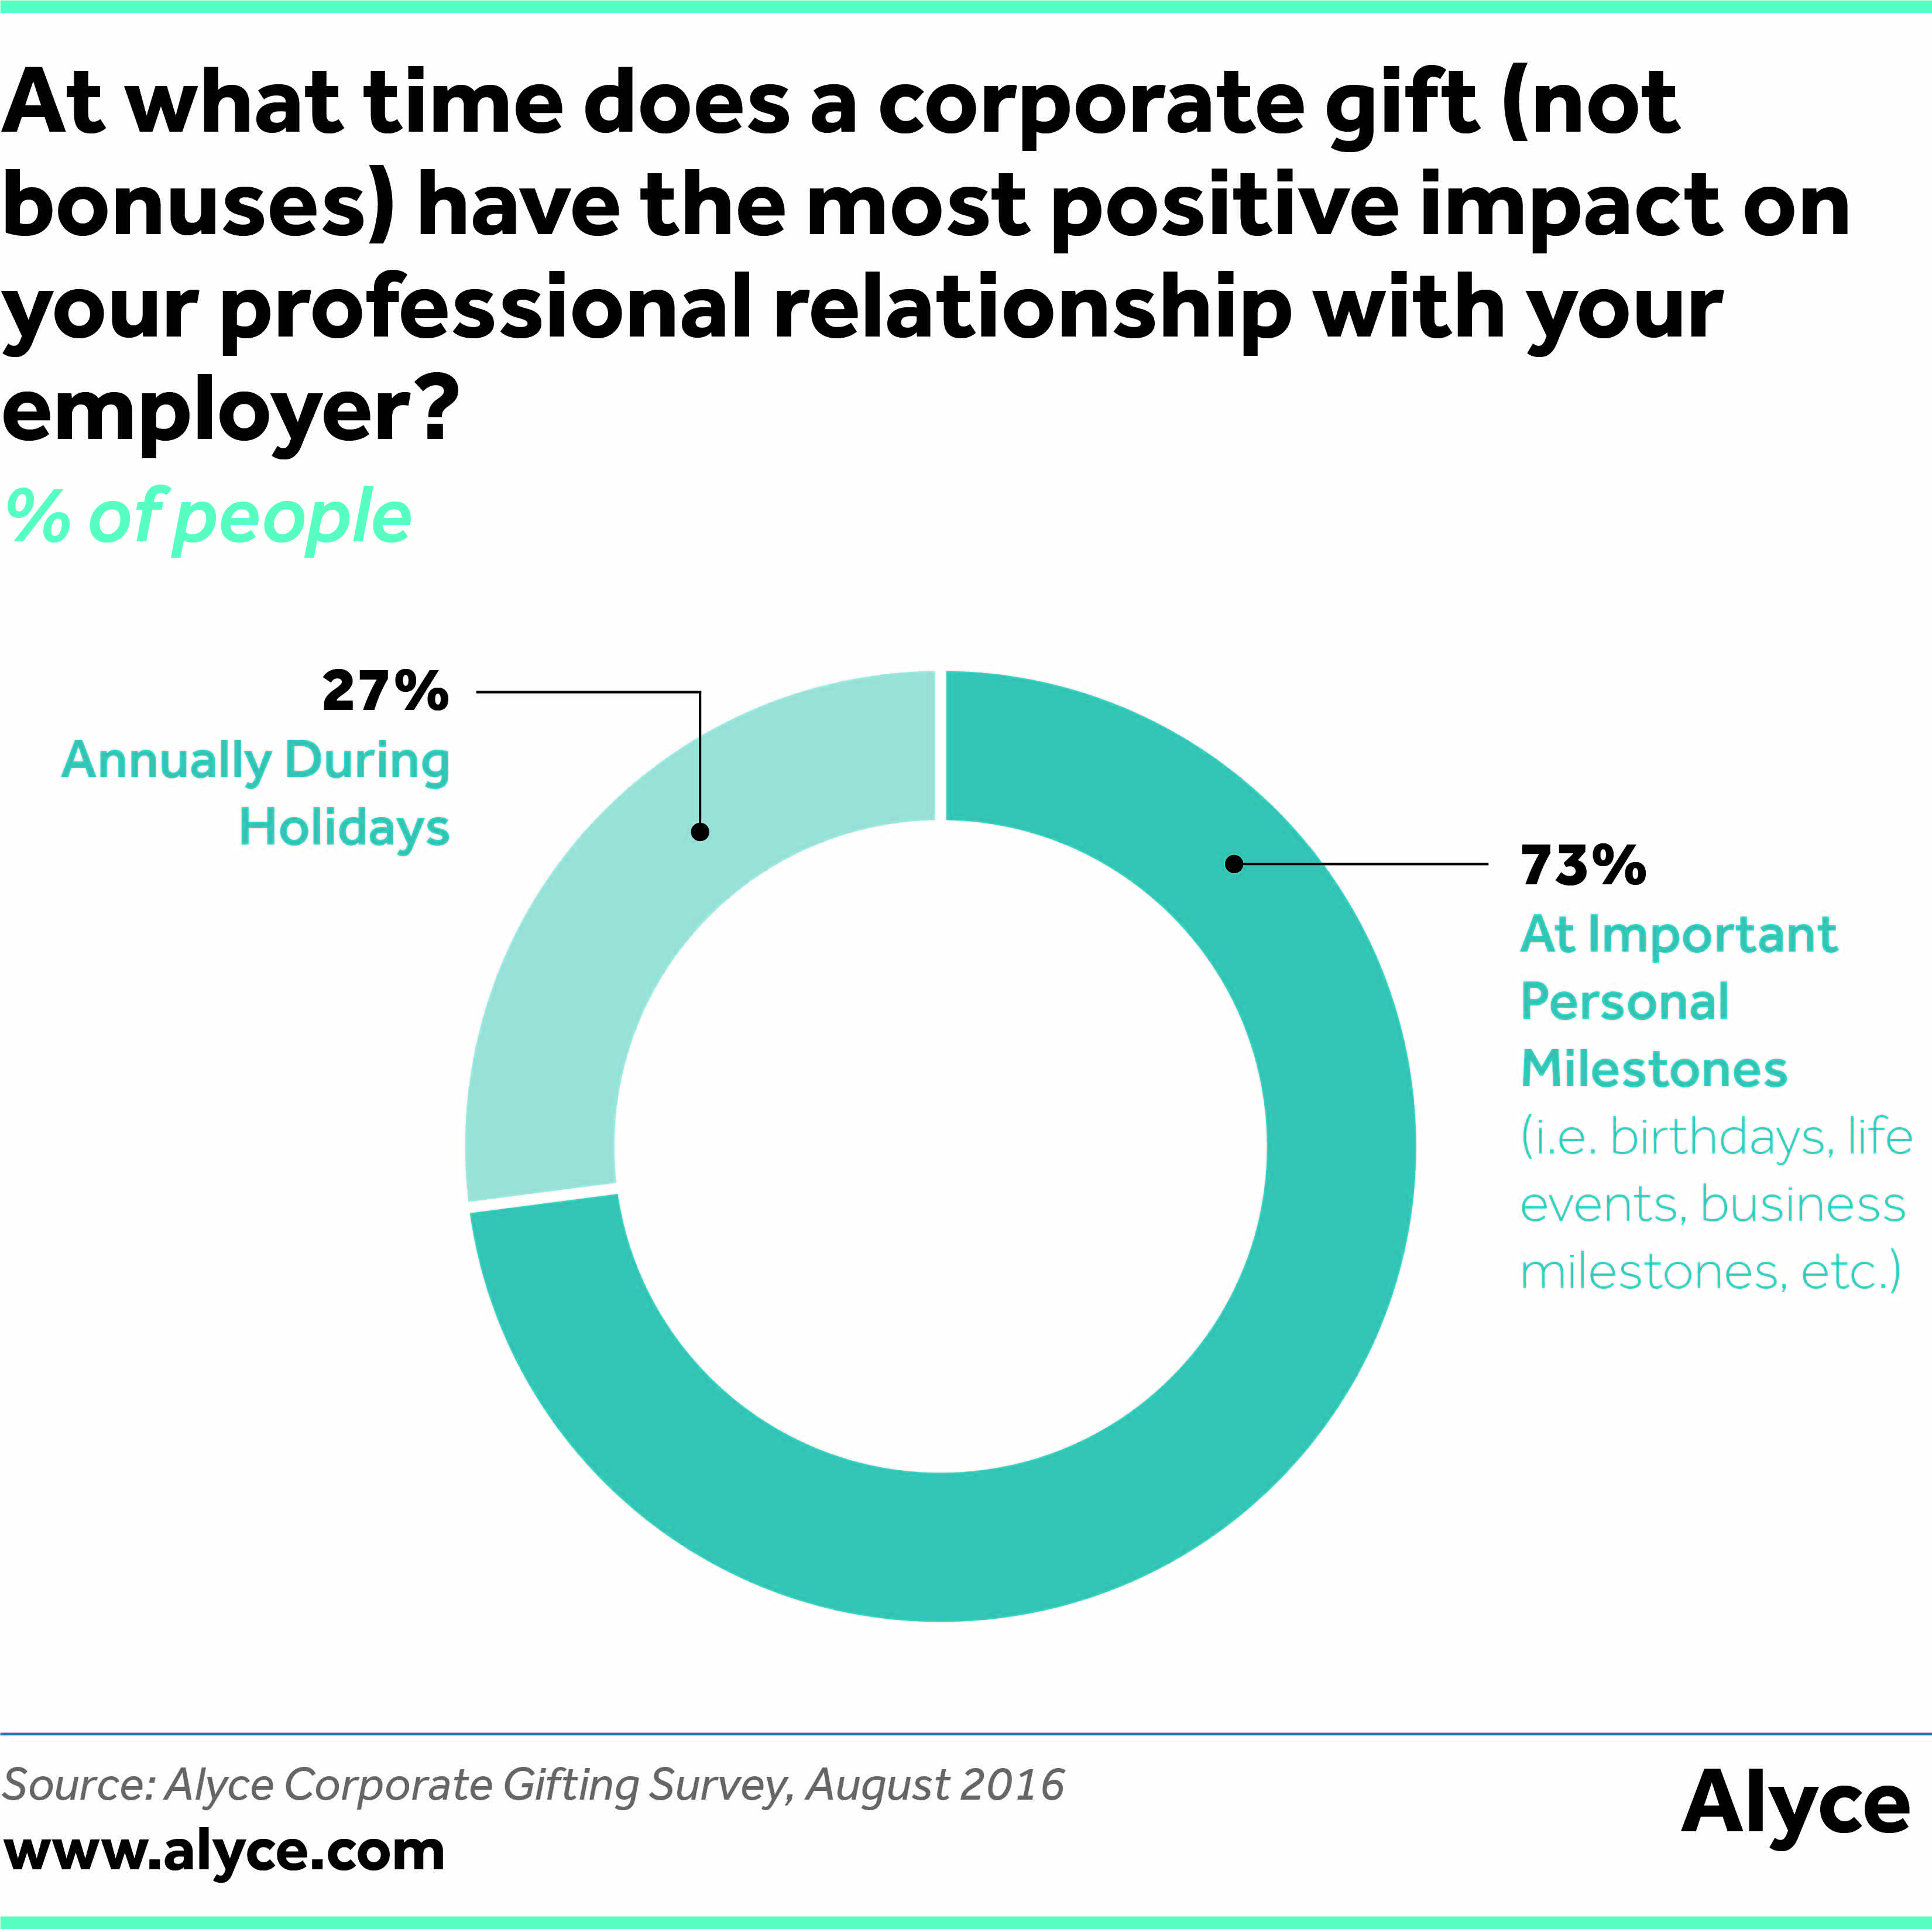 At what time does a corporate gift (not bonuses) have the most positive impact on your professional relationship with your employer?